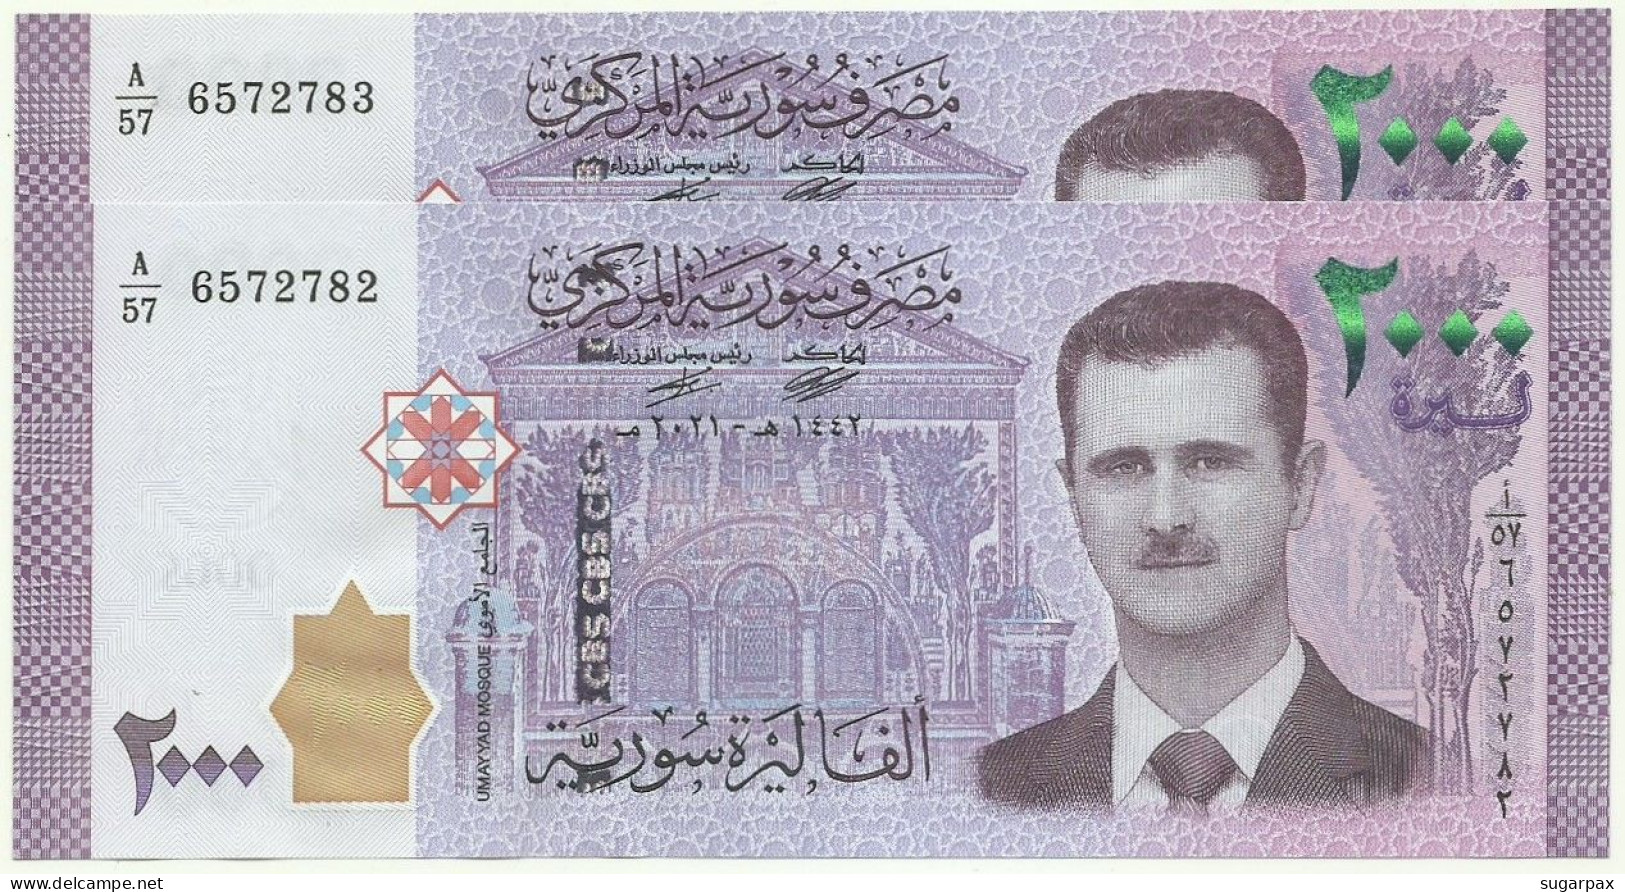 Syria - 2 X 2000 Syrian Pounds - 2021 / AH 1442 - Pick 117.NEW - Unc. - Serie A/57 - 2.000 - Syrien